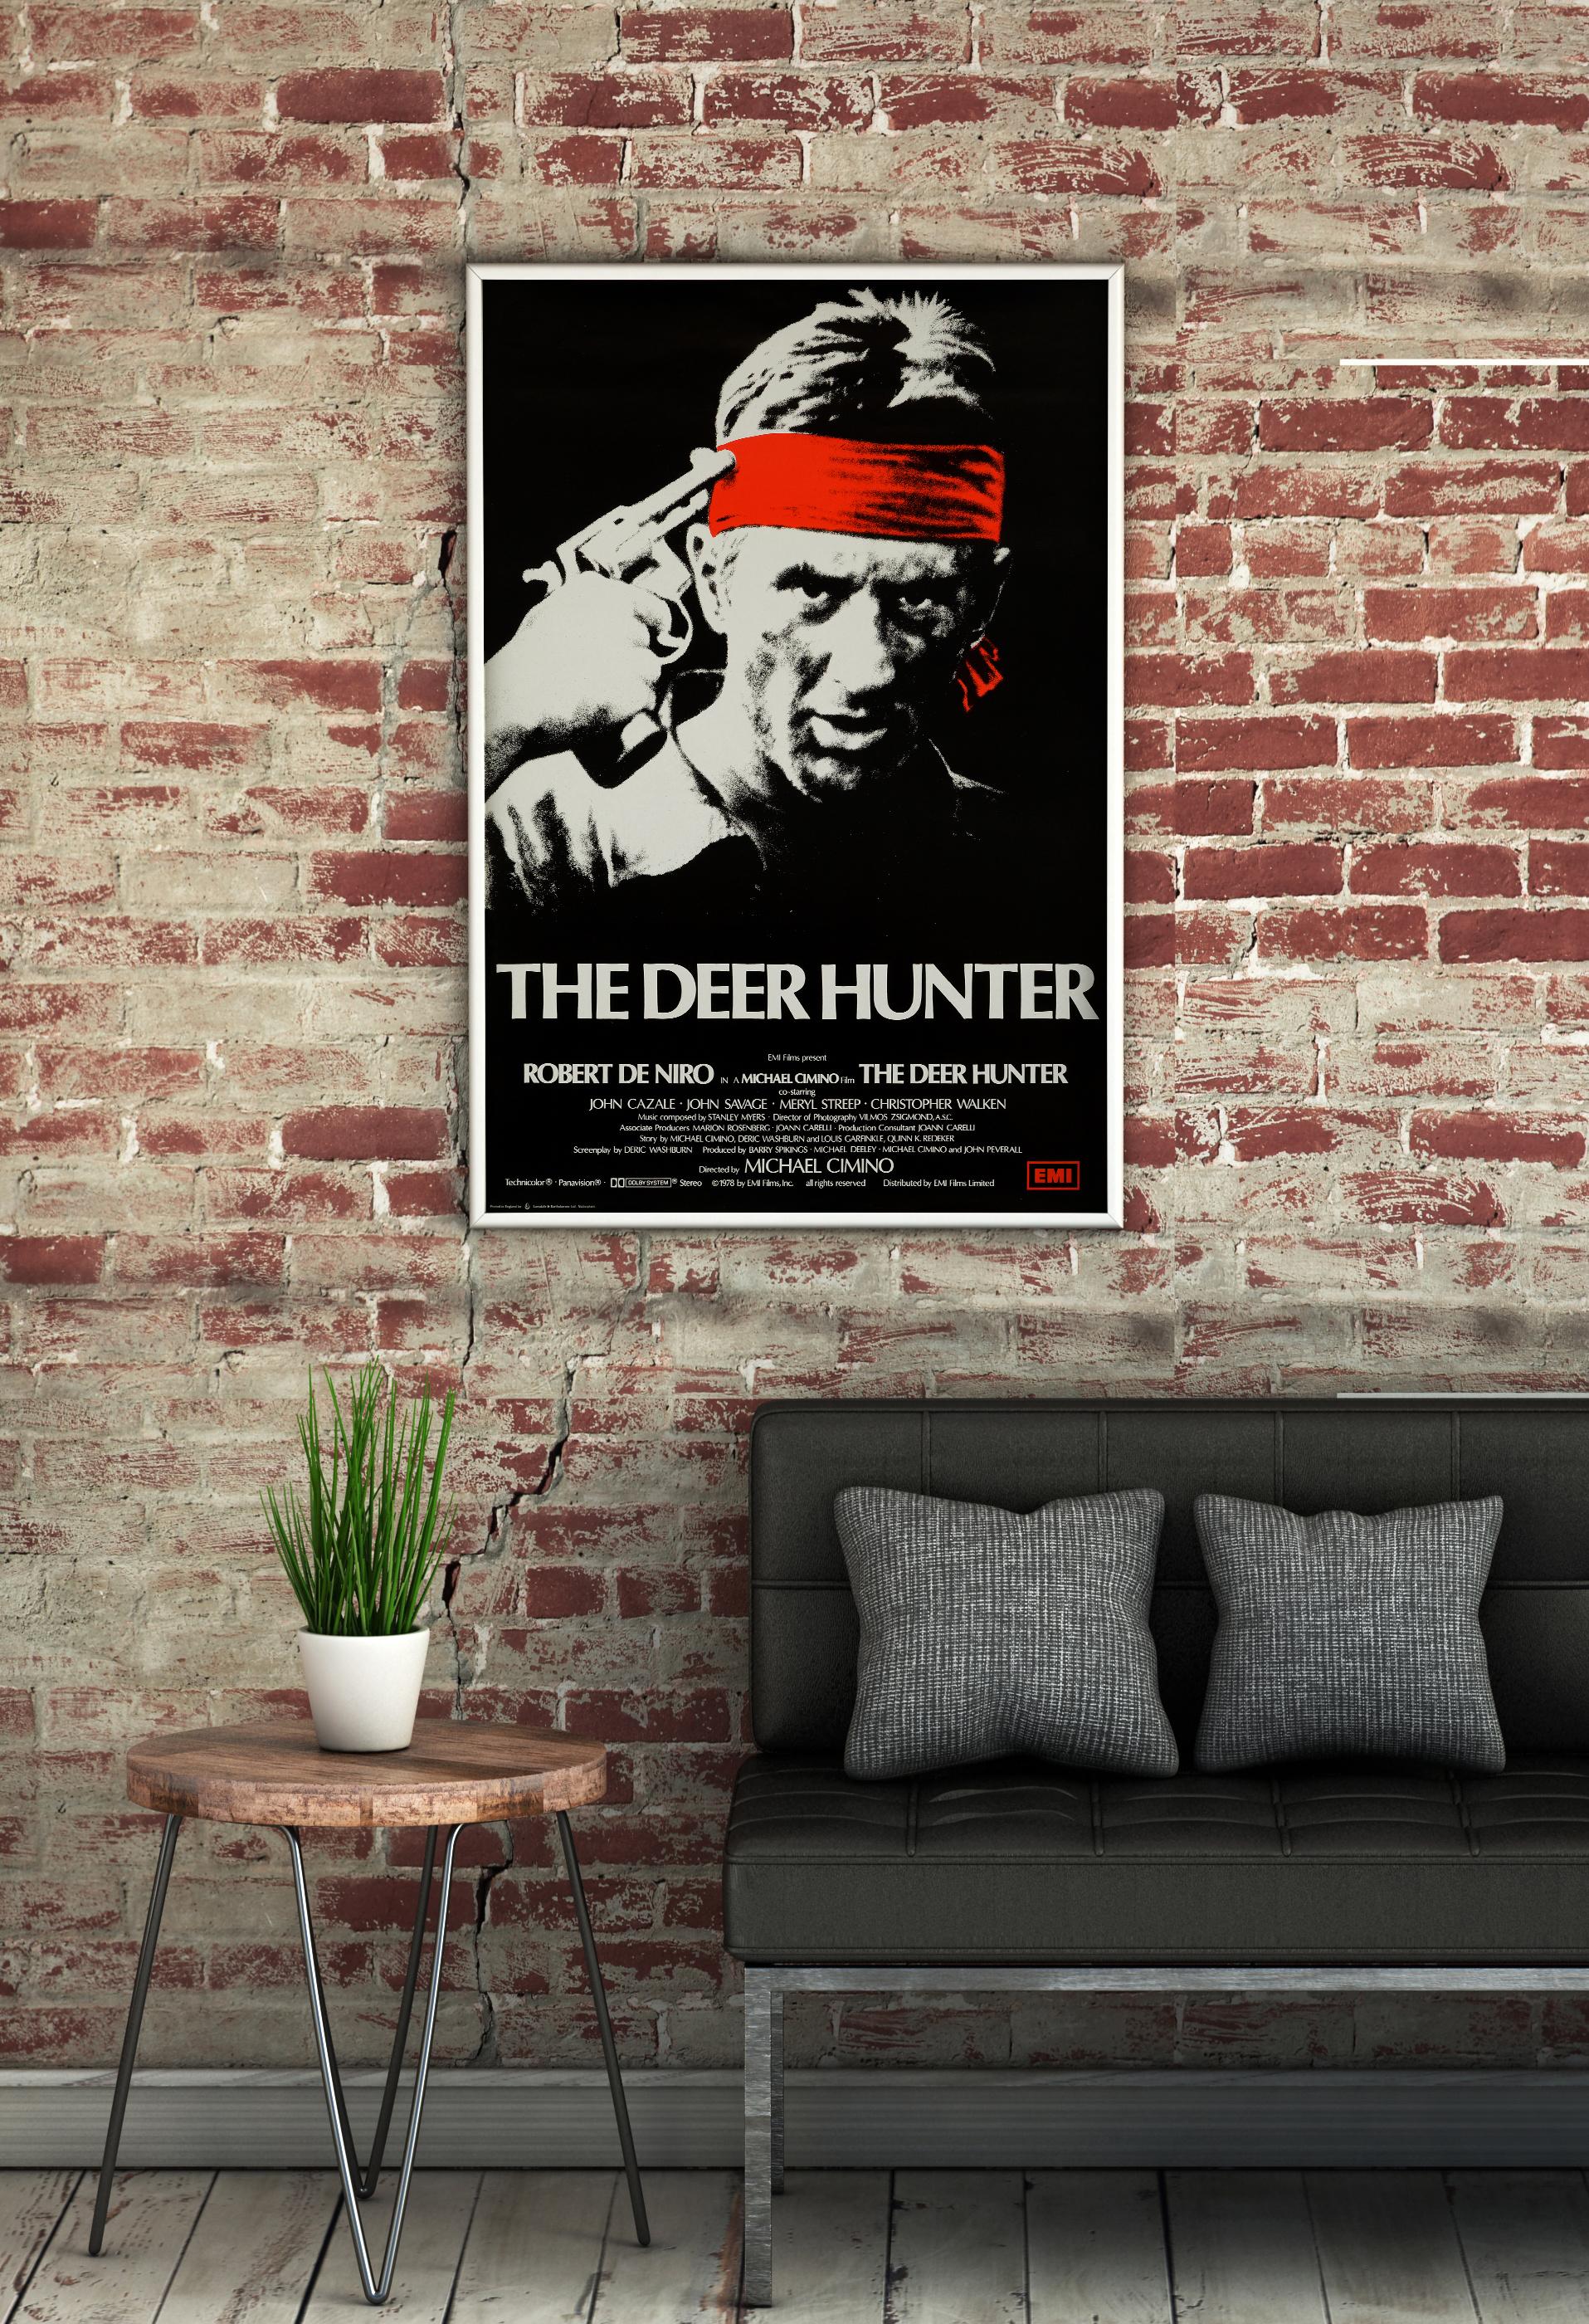 An early attempt by Hollywood to process the trauma of Vietnam, Michael Cimino's unflinching 1978 war epic 'The Deer Hunter' has endured as a key cinematic examination of the conflict. Starring Robert De Niro, Christopher Walken and Meryl Streep in